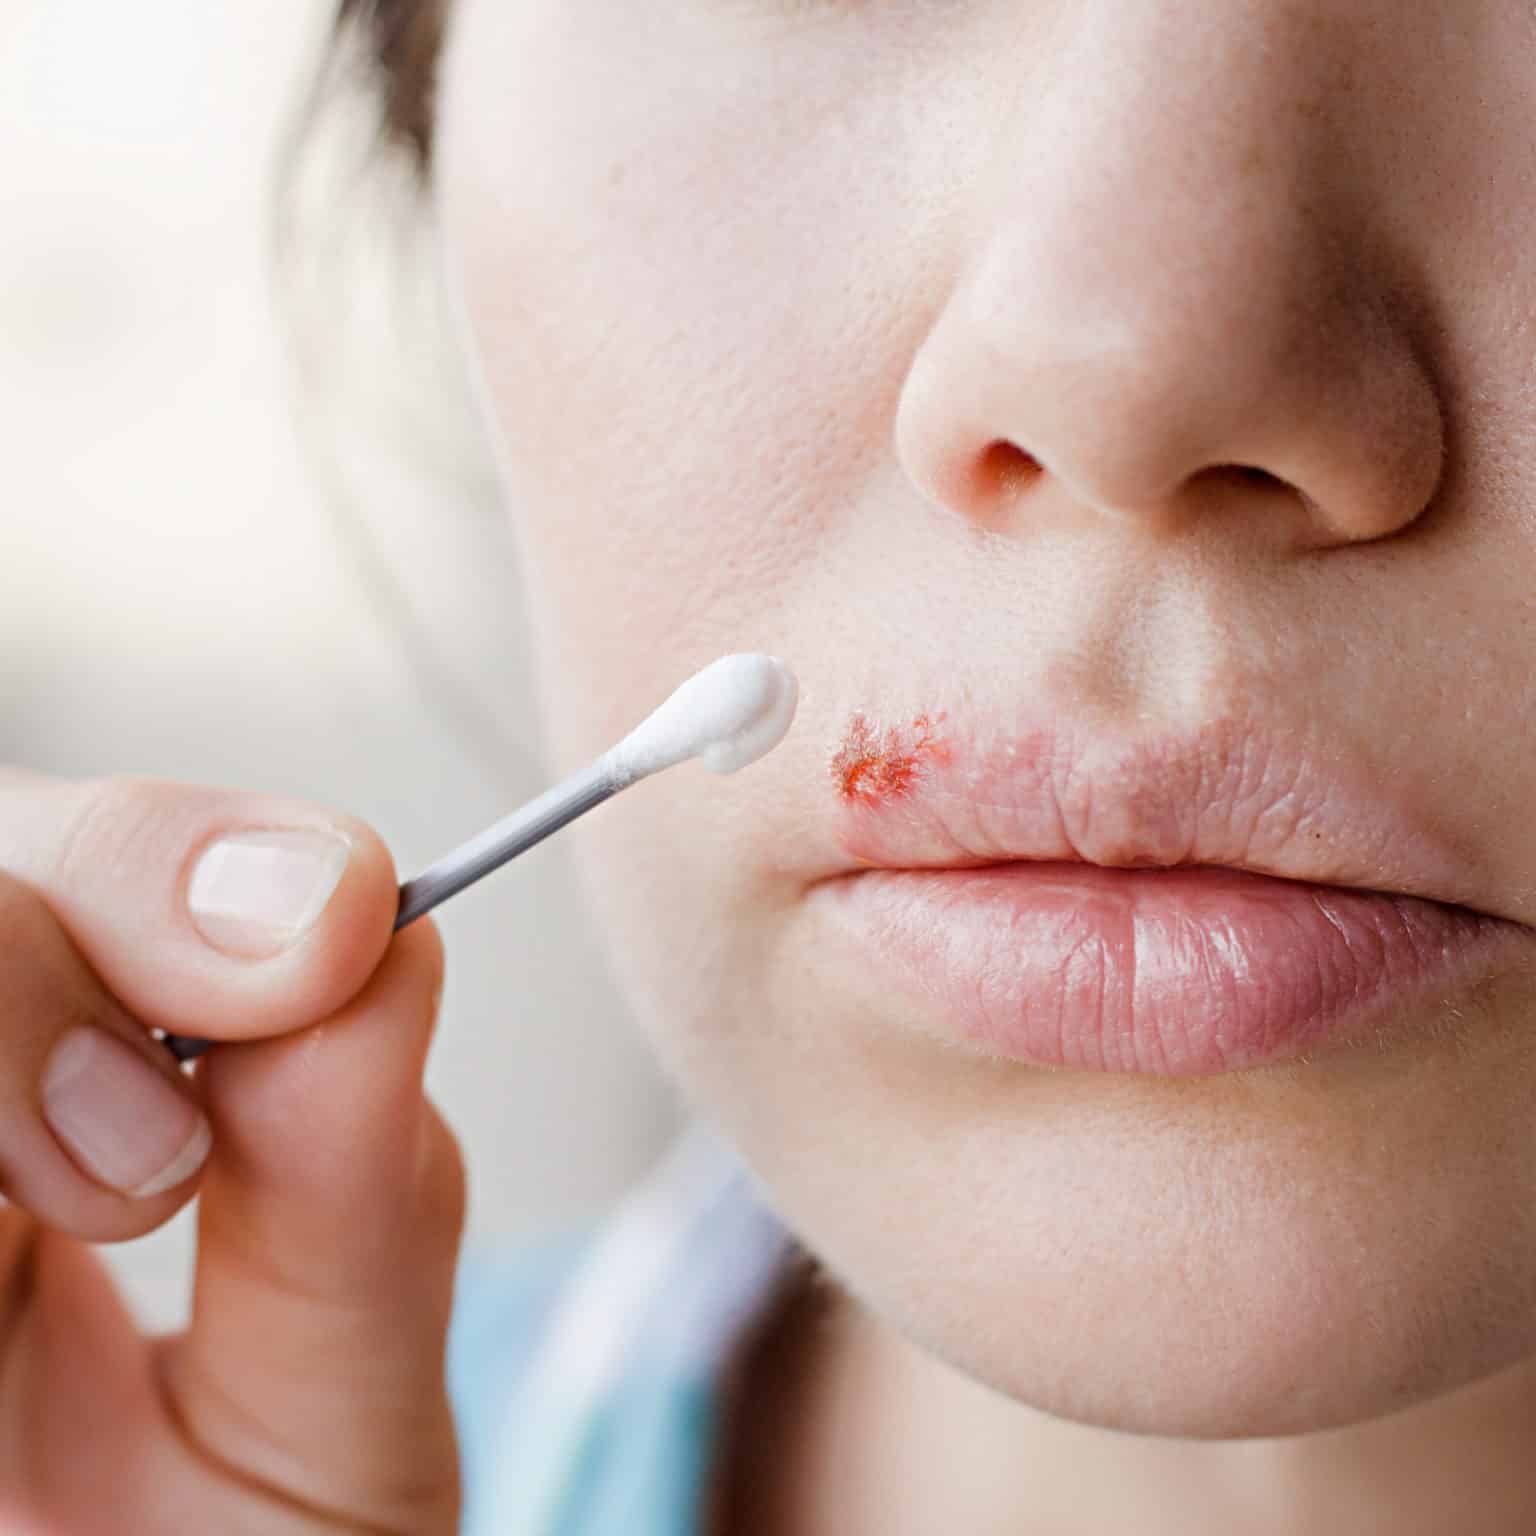 How to Quickly Get Rid of a Cold Sore